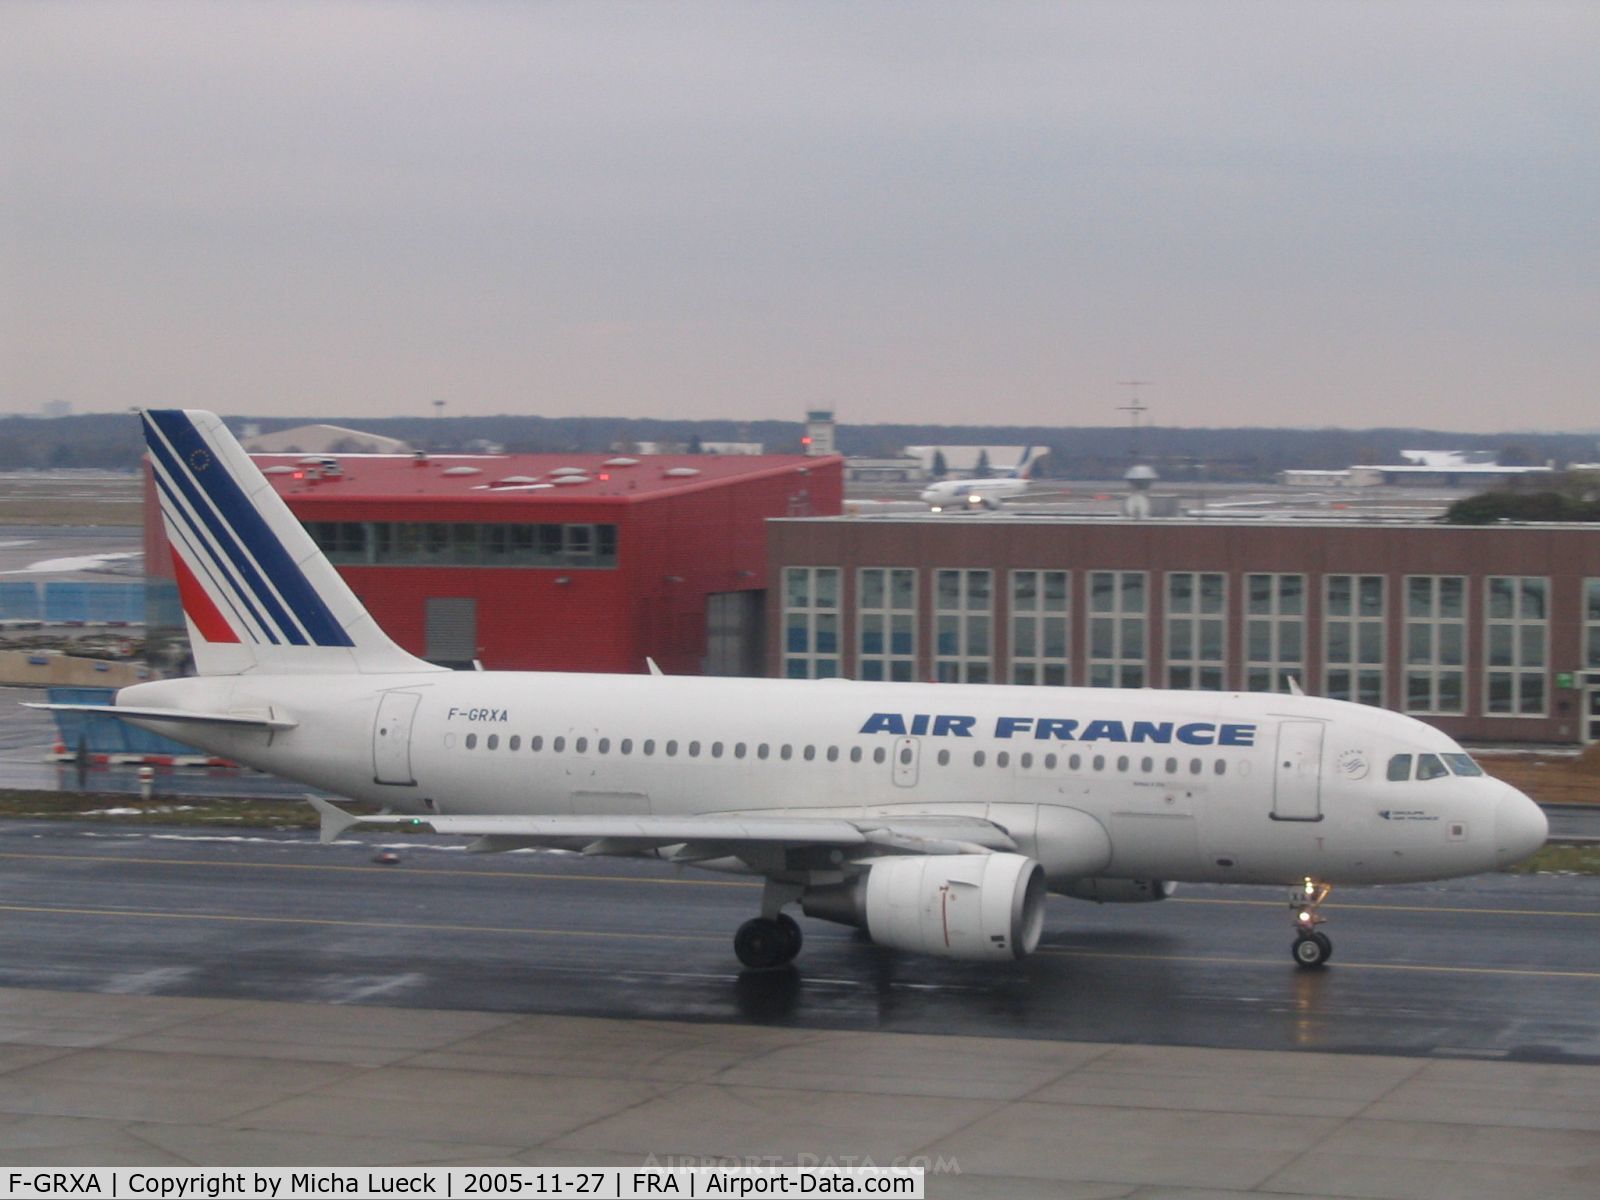 F-GRXA, 2001 Airbus A319-111 C/N 1640, A frequent visitor in Frankfurt